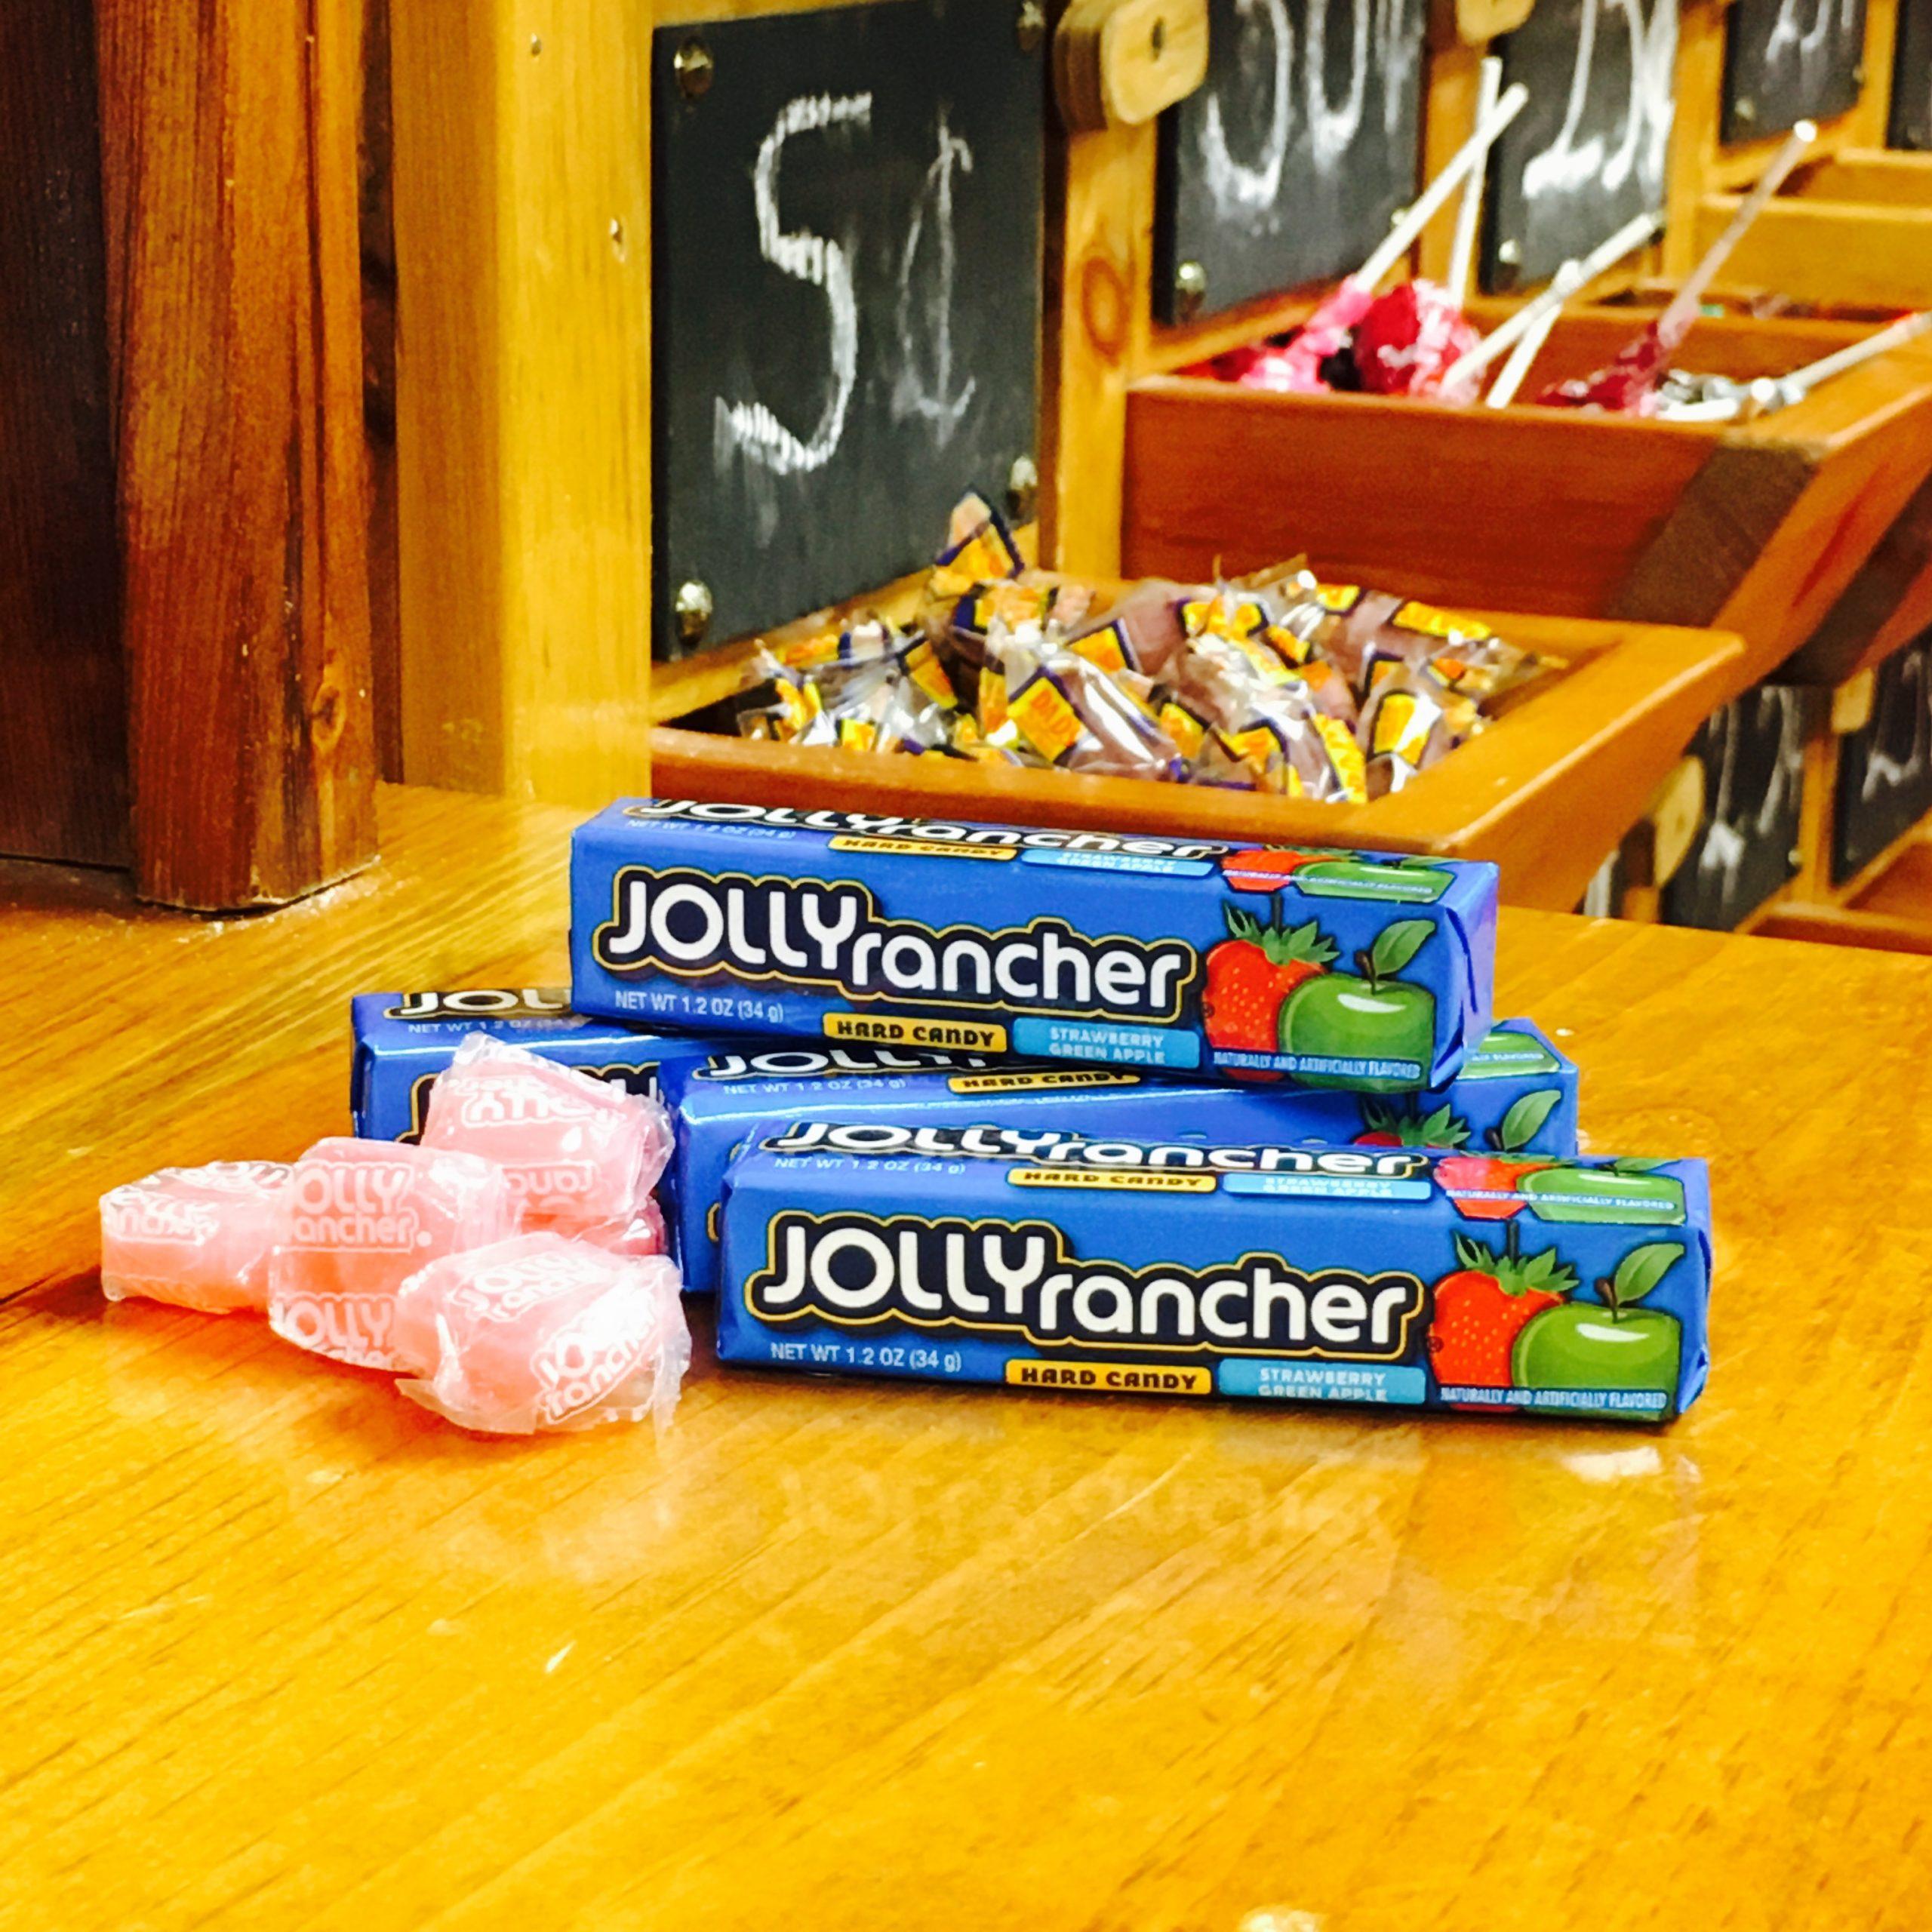 Jolly Rancher Crayon Soft Fruit Flavored Candy, Green Apple, Shop